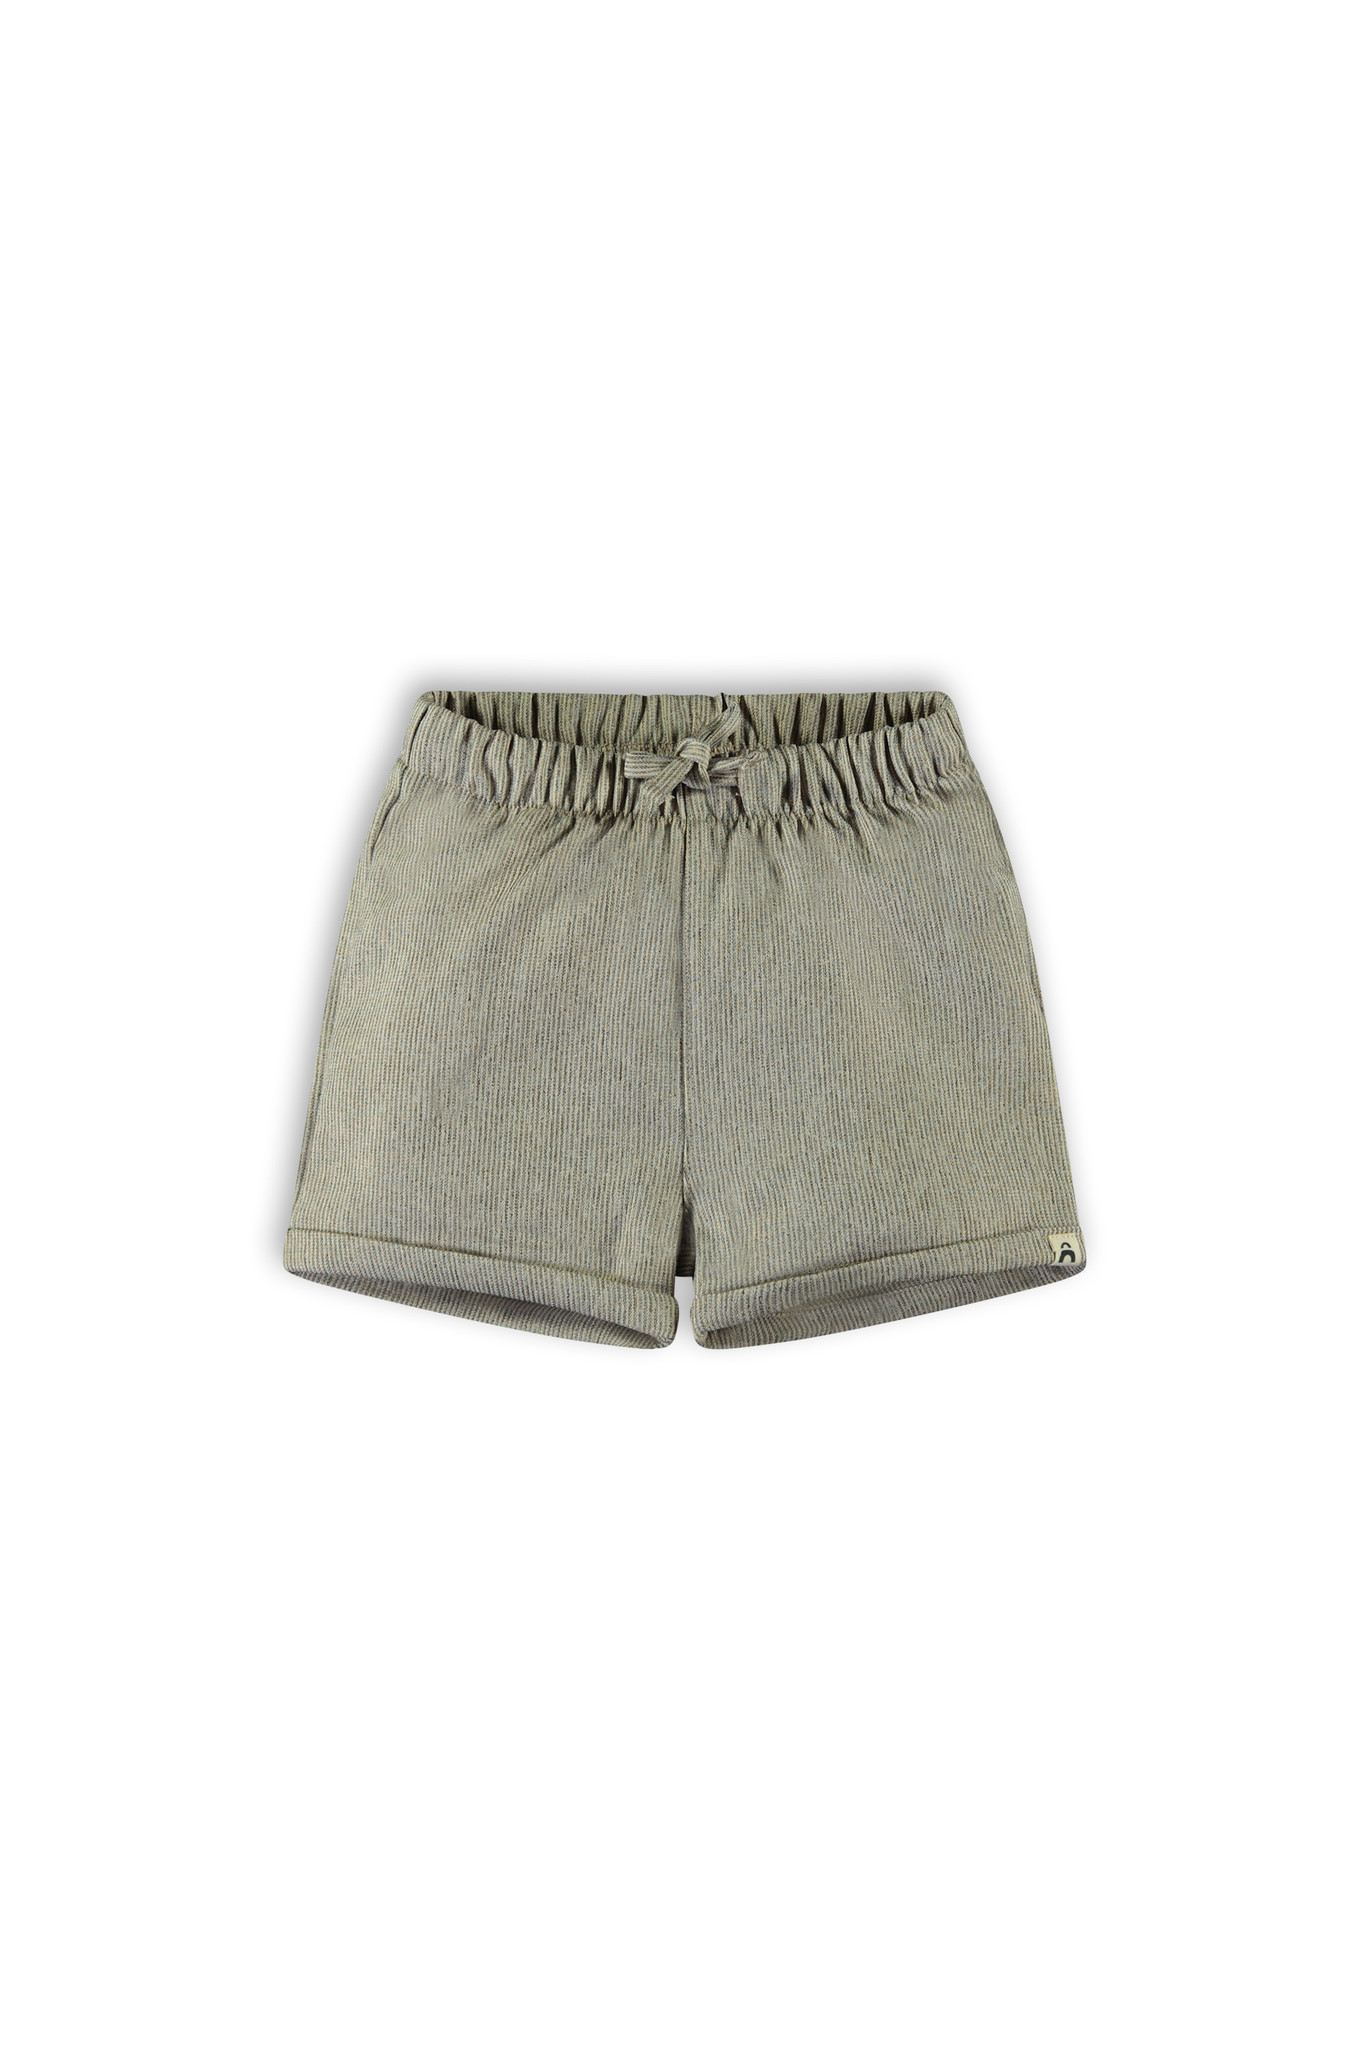 The New Chapter The New Chapter | Short Woven - Deep Taupe